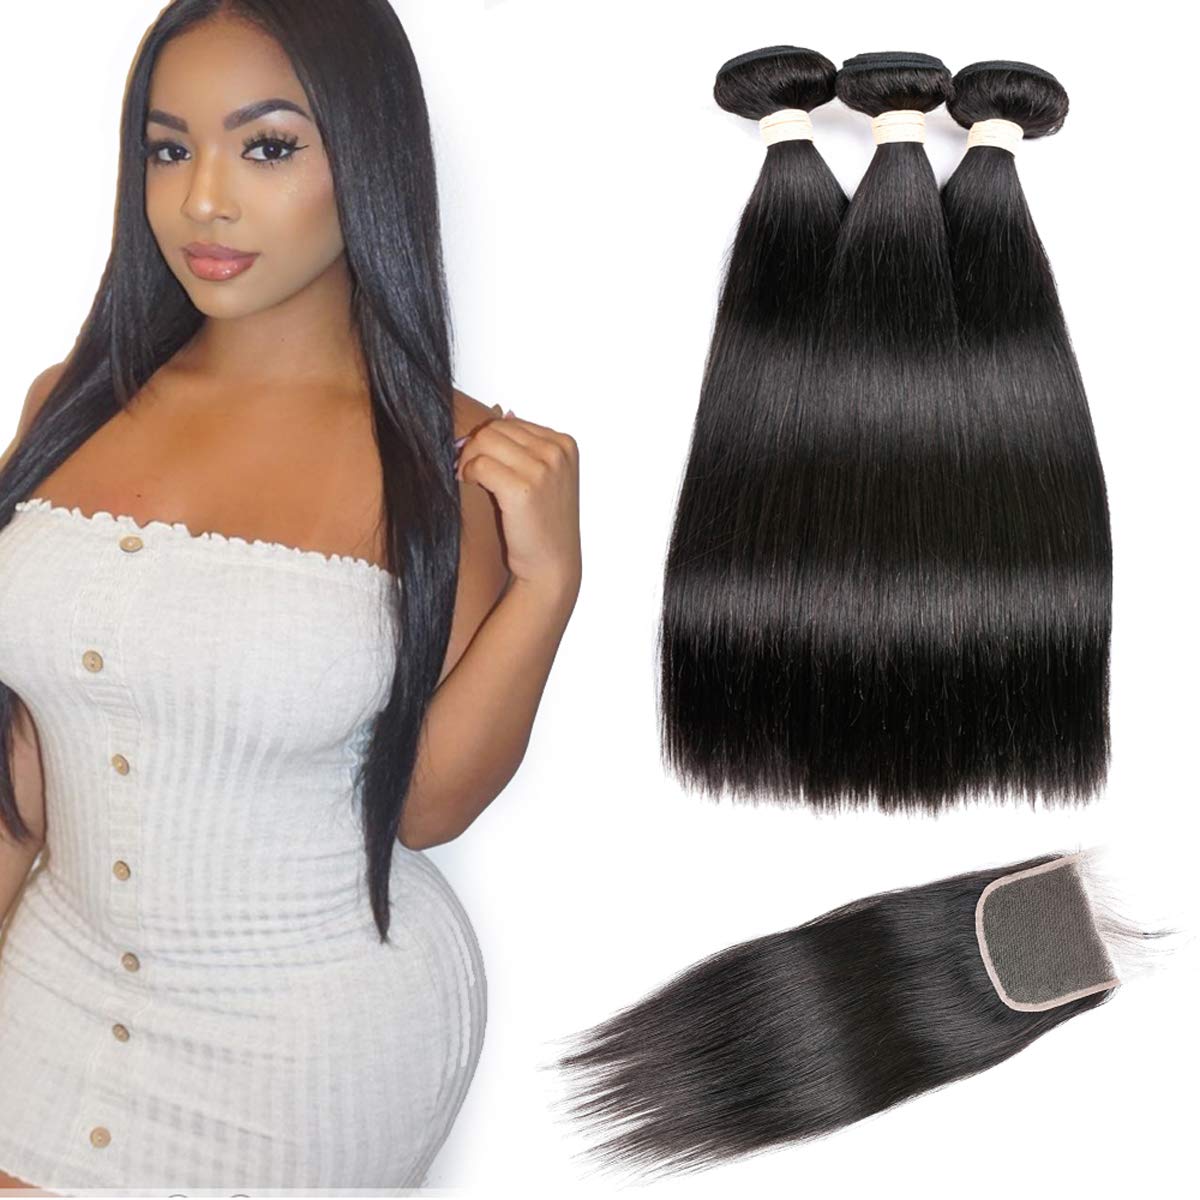 Brazilian Straight Virgin Hair 3 Bundles With Closure Free Part (14 16 18 with 14inch) custom-wigs-extensions-toupee-hair-pieces-hair-solutions